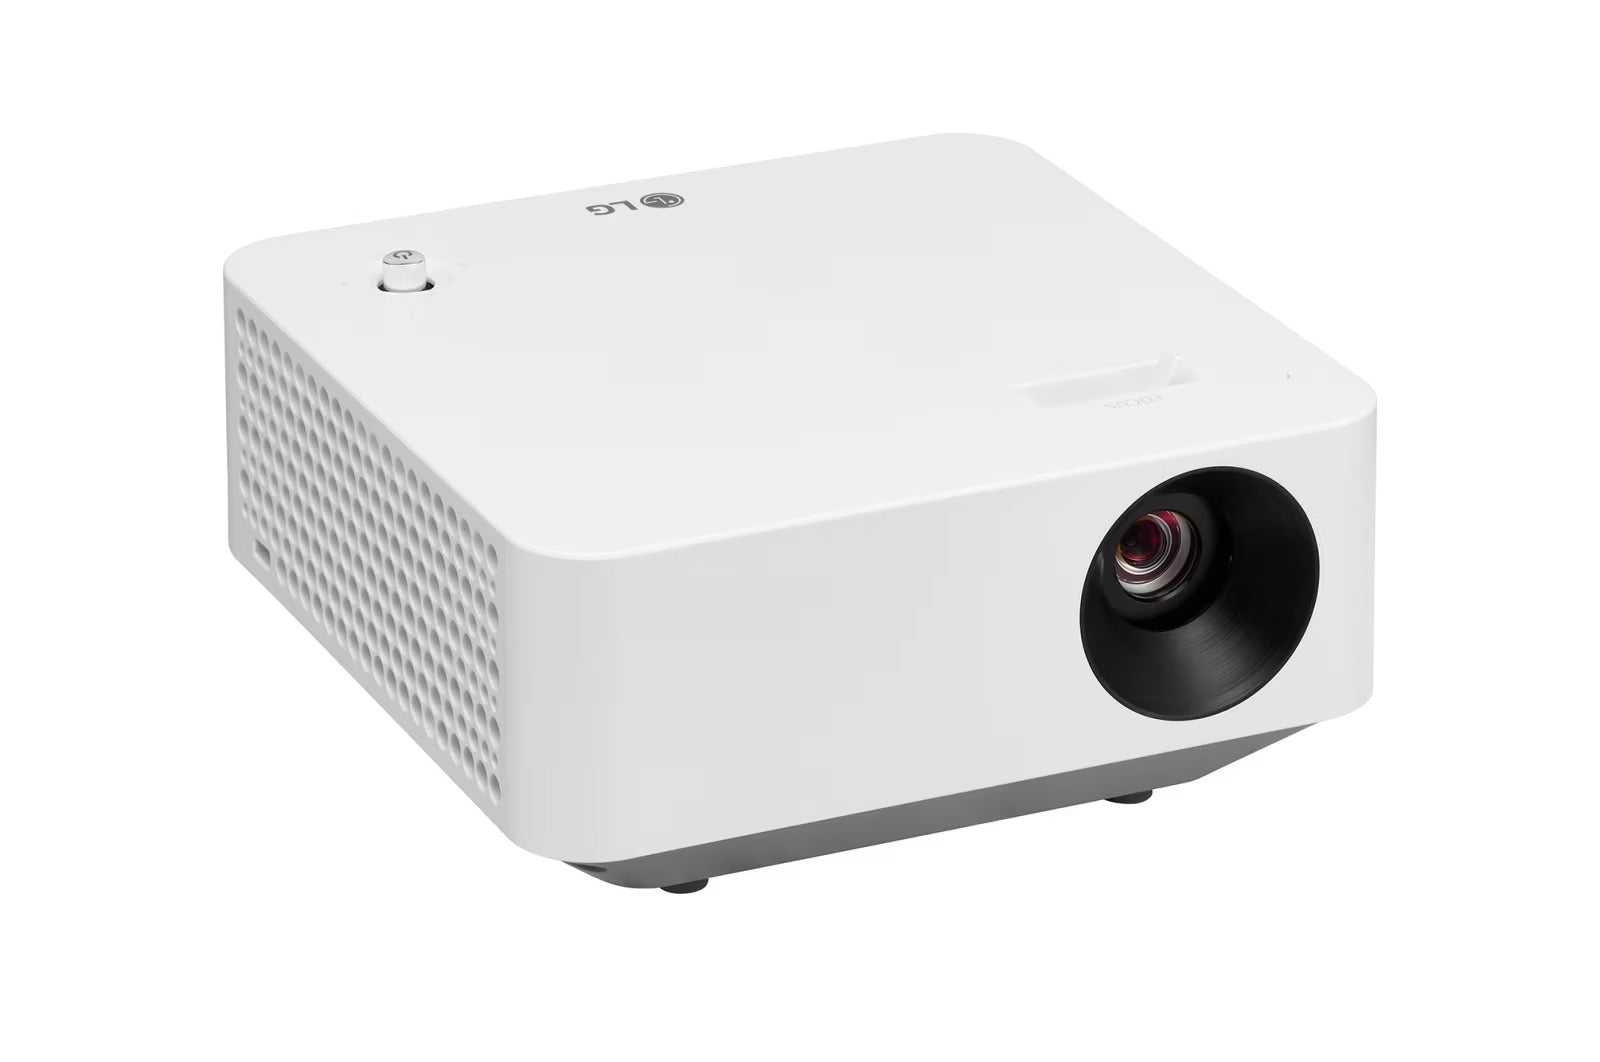 LG PF510Q CineBeam Smart Portable Projector with Simple Remote